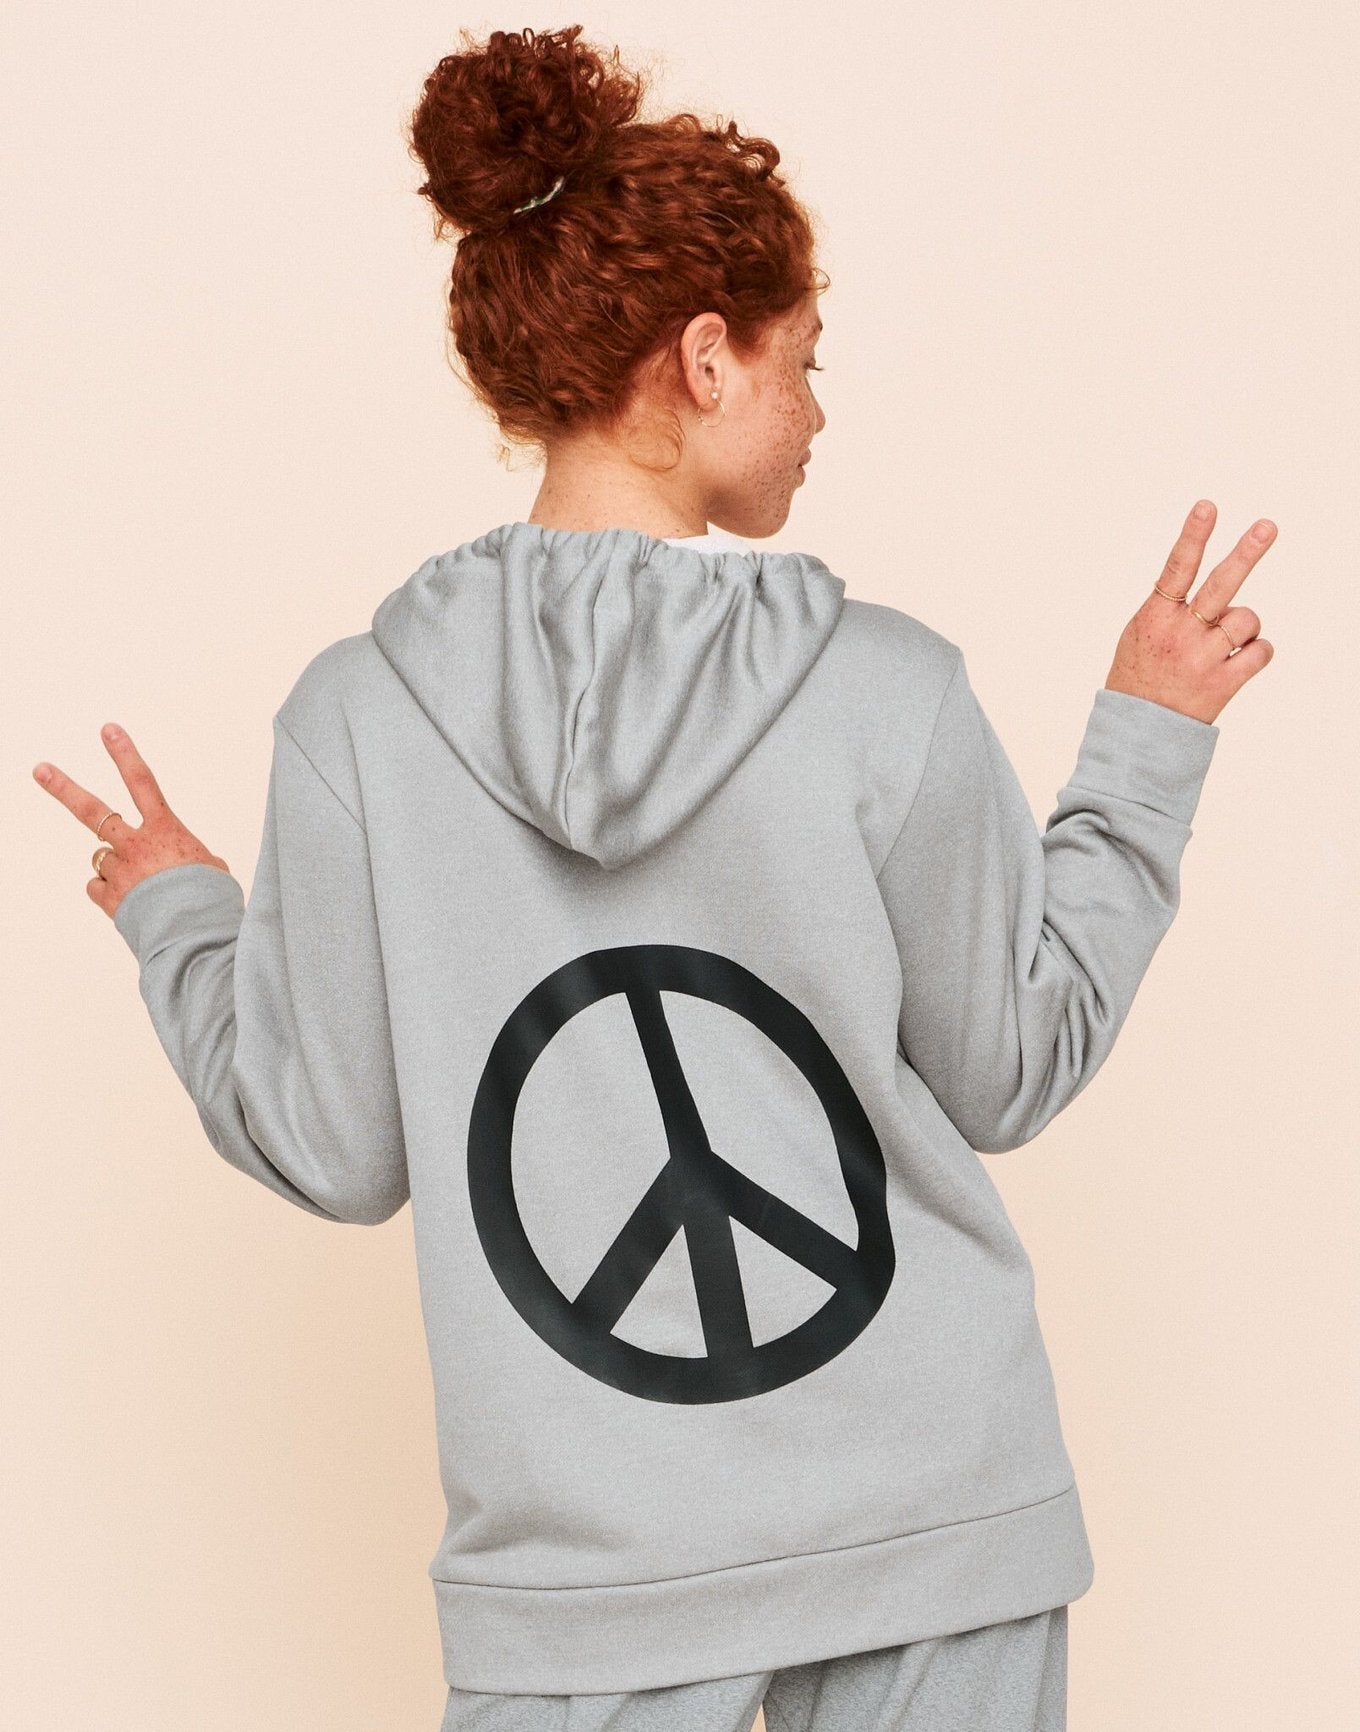 Earth Republic Faye Hooded Pullover Hoodie in color Oyster Mushroom Marl and shape hoodie